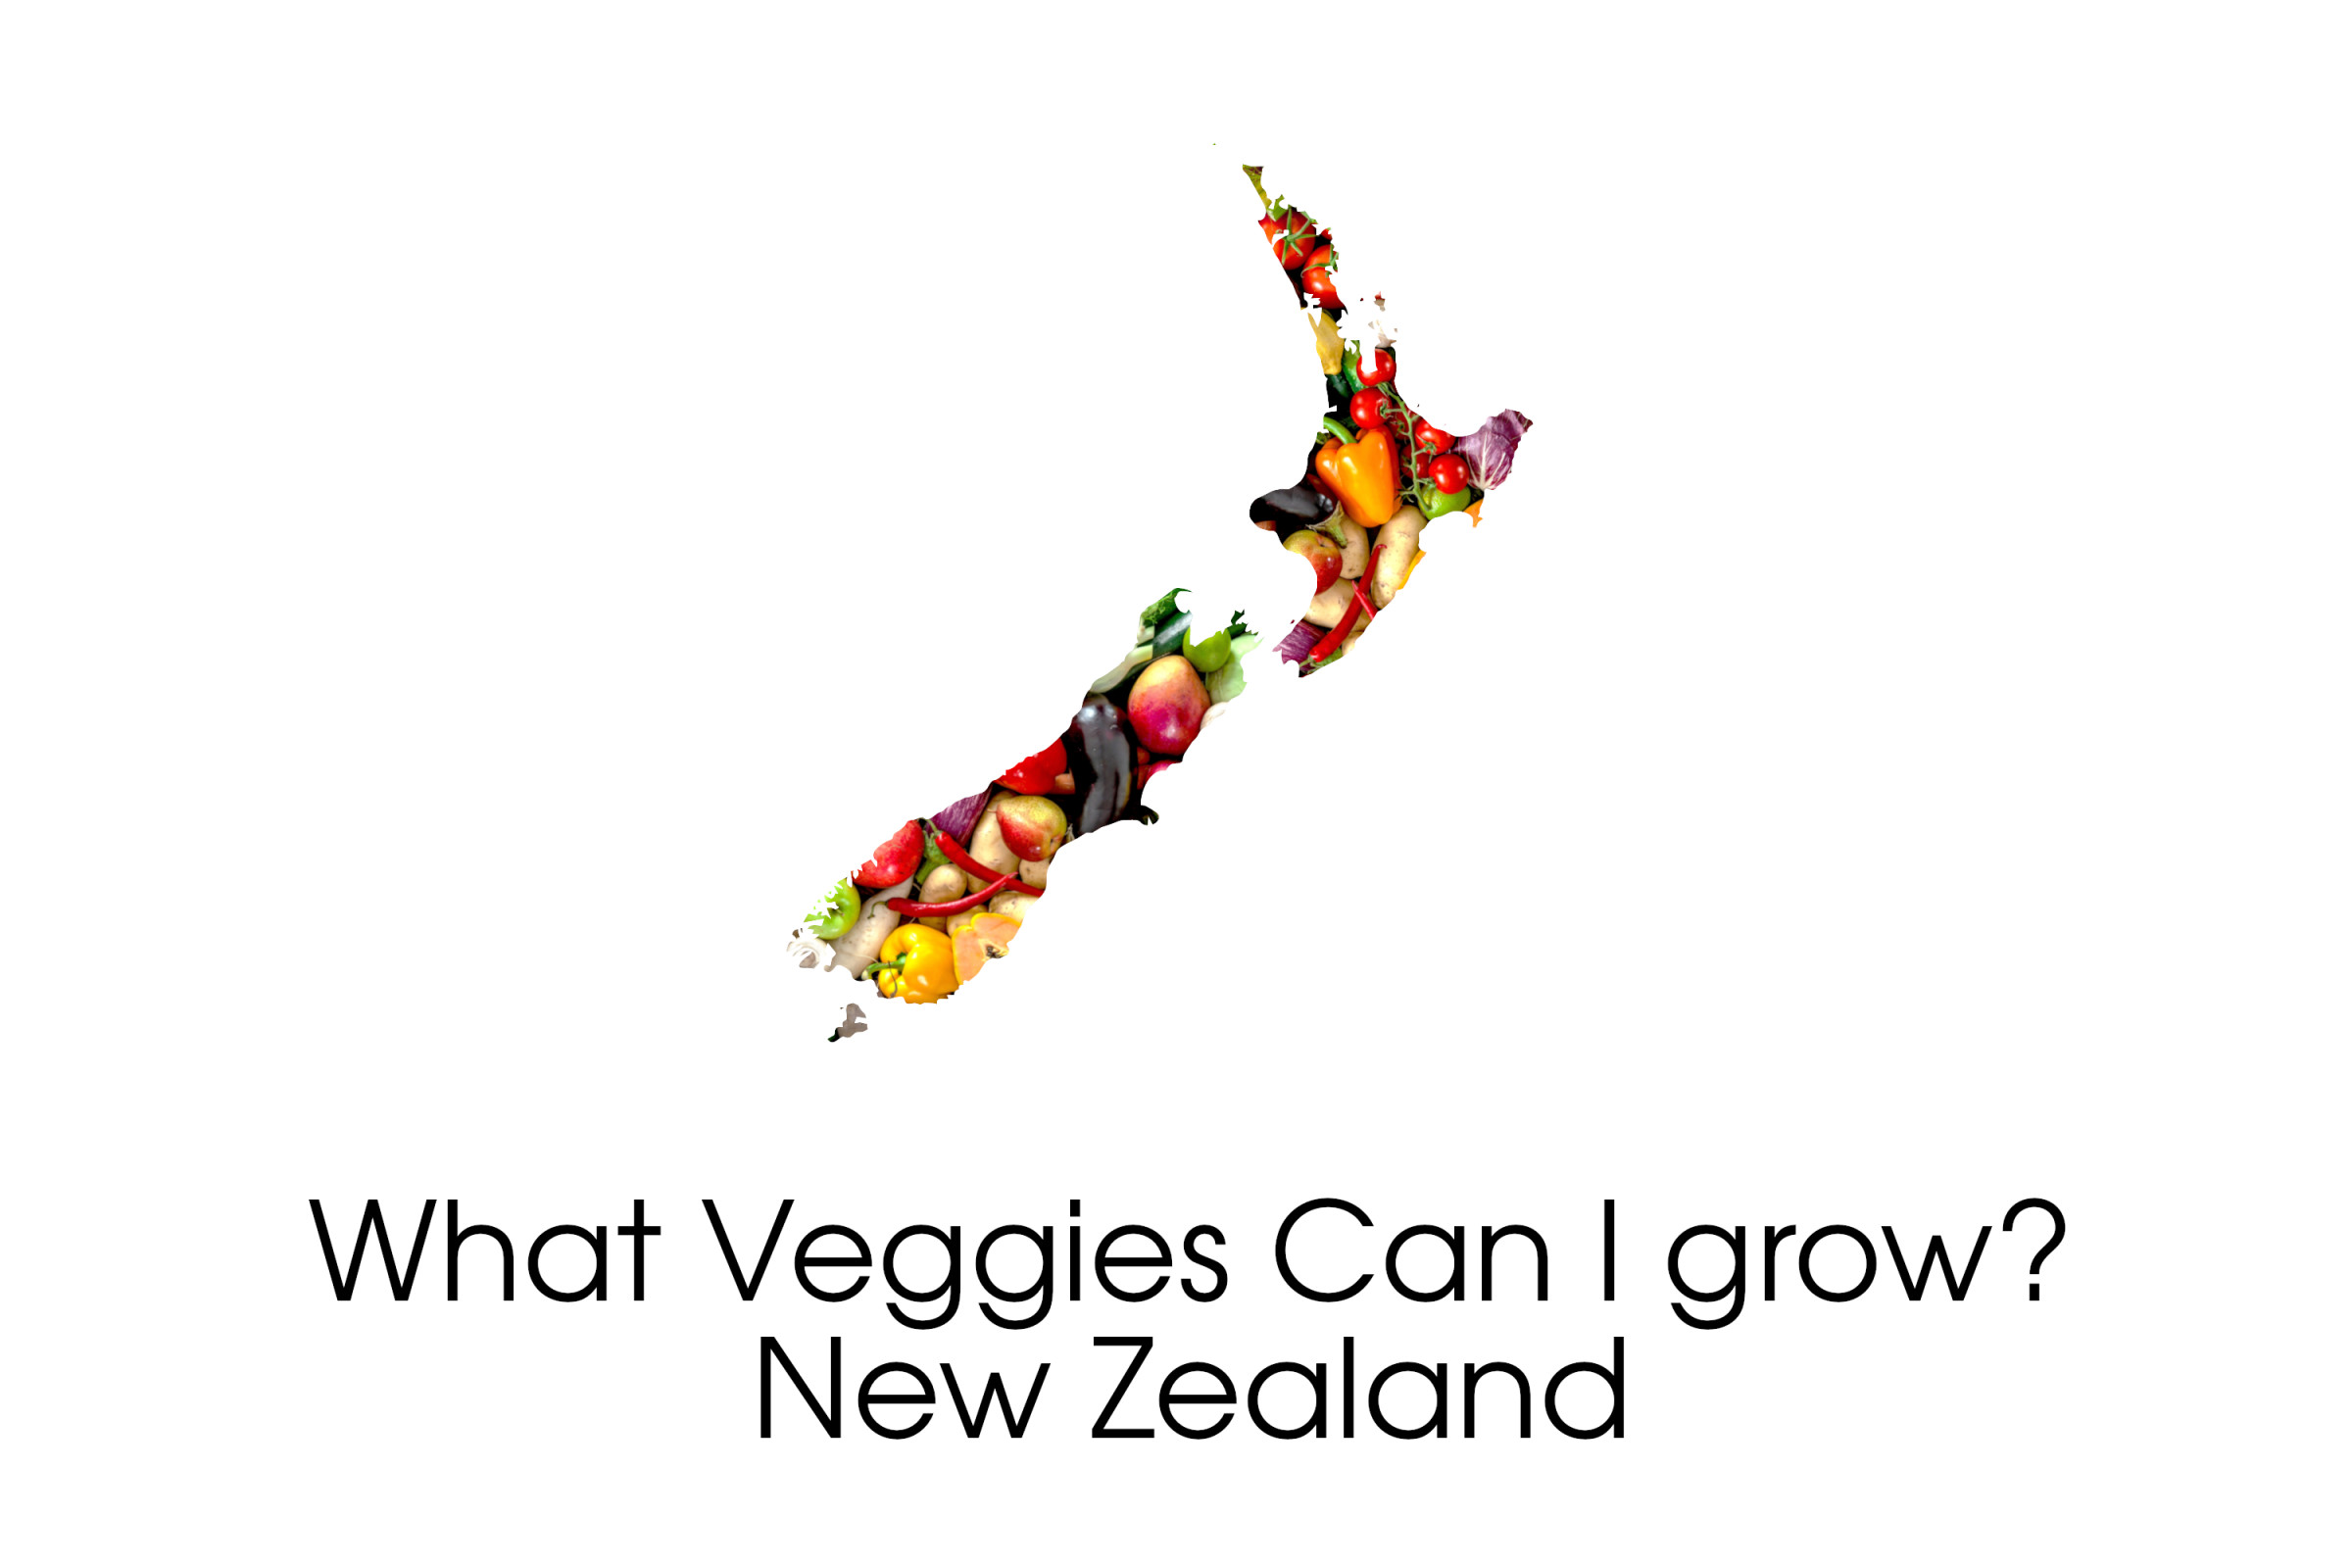 Need some inspiration on what Veggies to grow in your area?